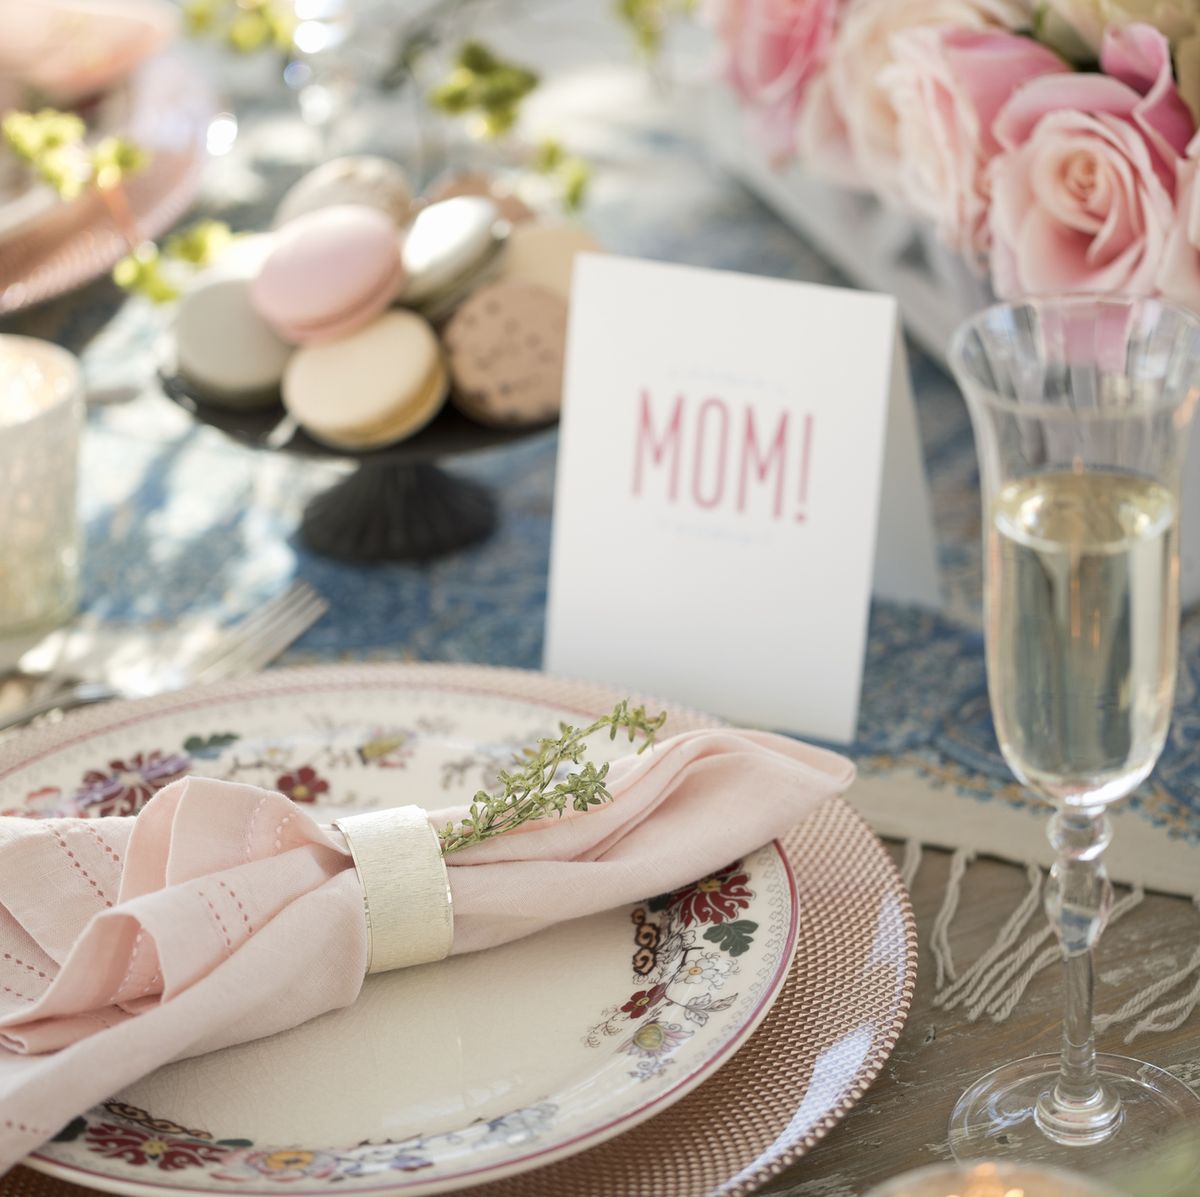 https://hips.hearstapps.com/hmg-prod/images/elegant-mothers-day-dining-table-royalty-free-image-1677018466.jpg?crop=0.668xw:1.00xh;0.0994xw,0&resize=1200:*